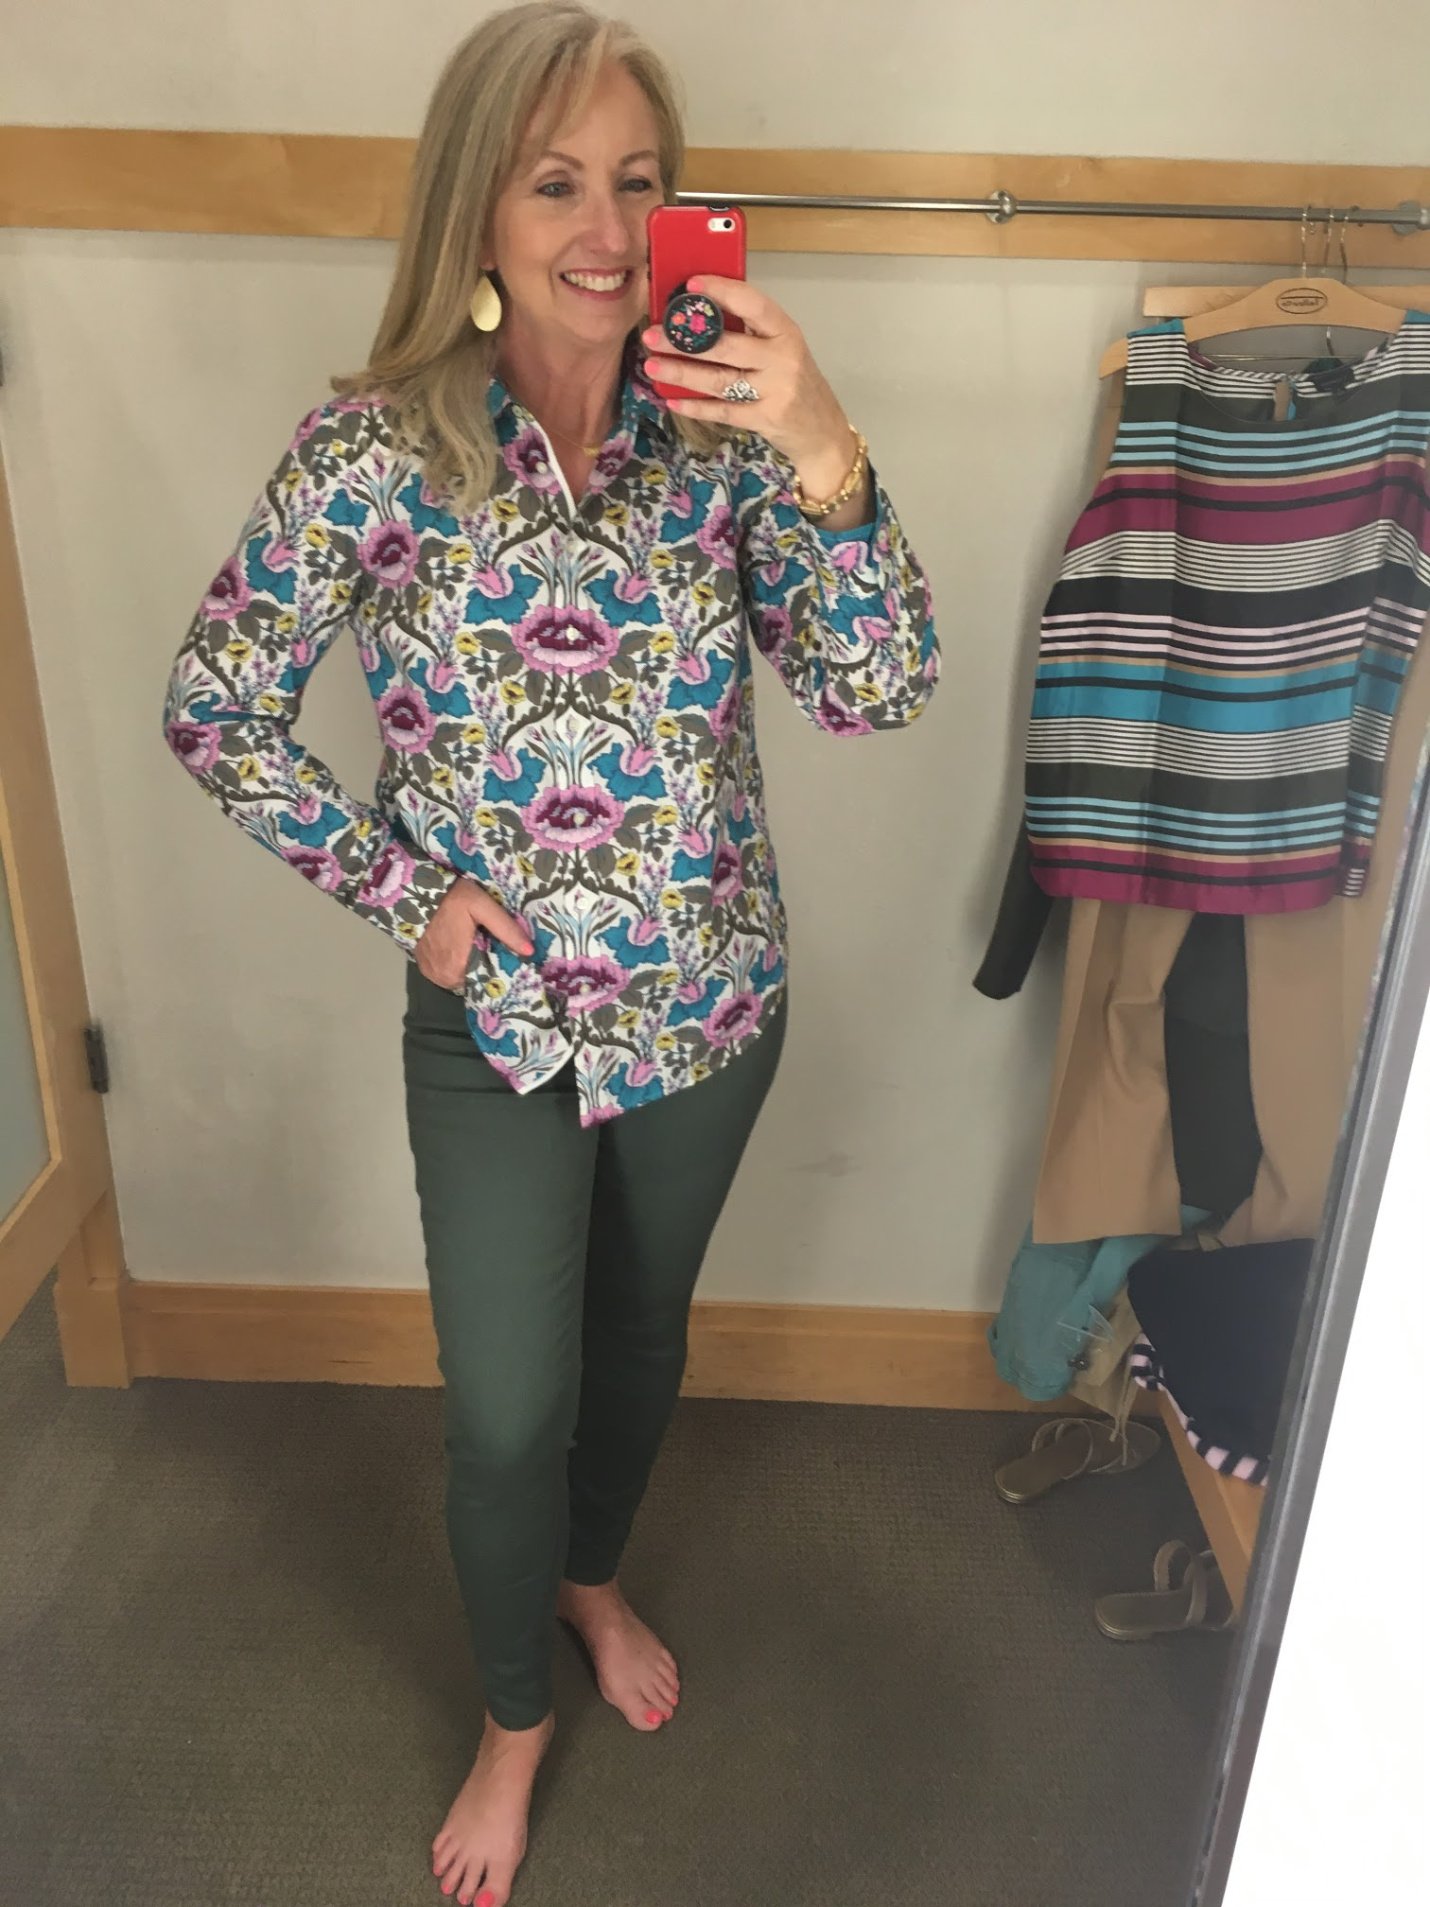 Talbots 2019 Fall Collection with 25% Off - Dressed for My Day